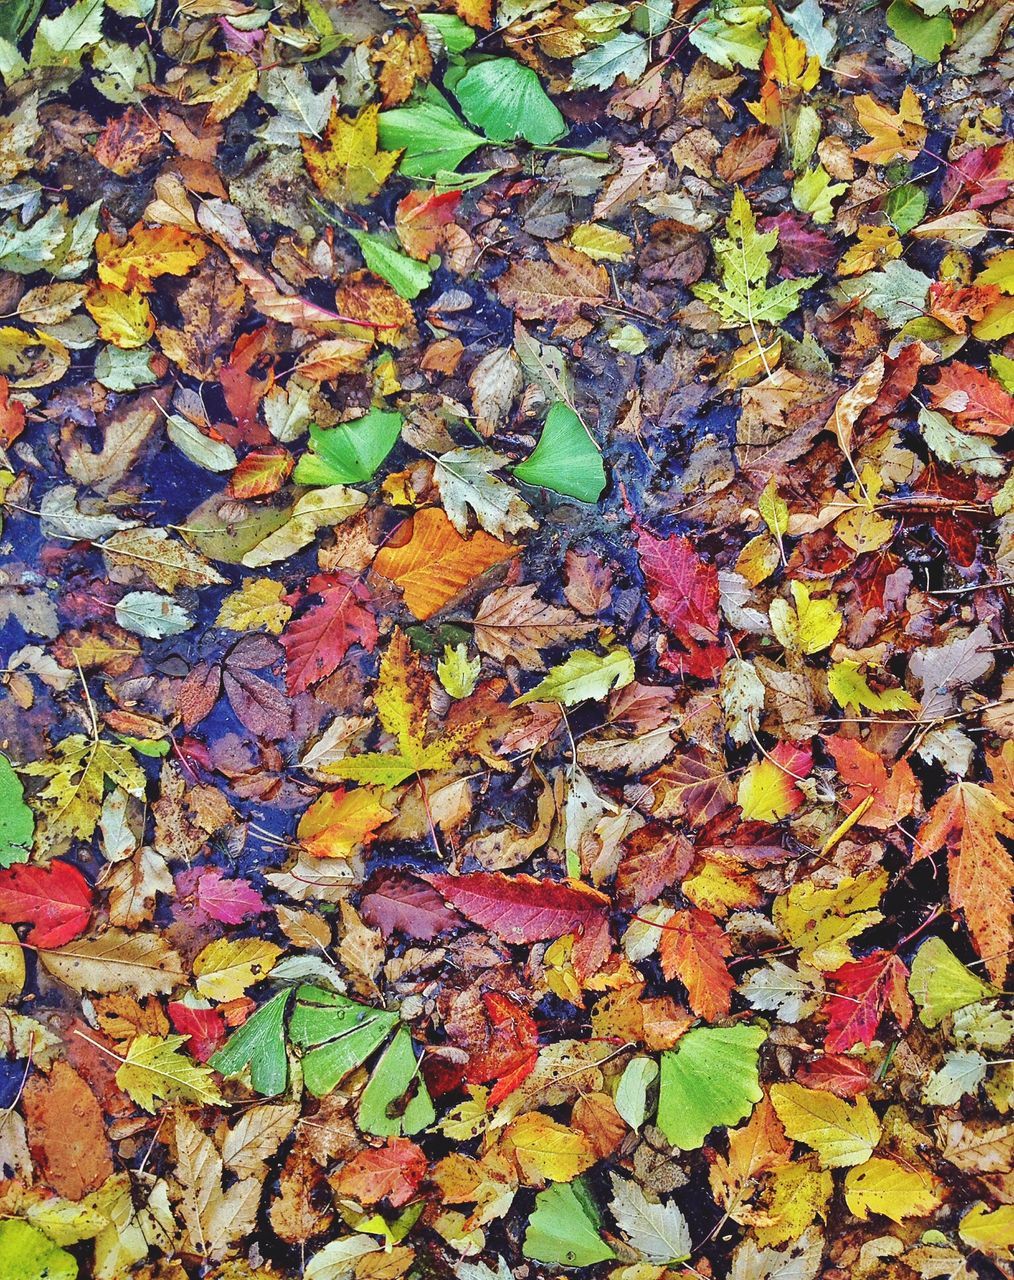 autumn, leaf, change, season, leaves, fallen, dry, full frame, high angle view, backgrounds, nature, abundance, maple leaf, multi colored, day, outdoors, natural condition, falling, no people, textured